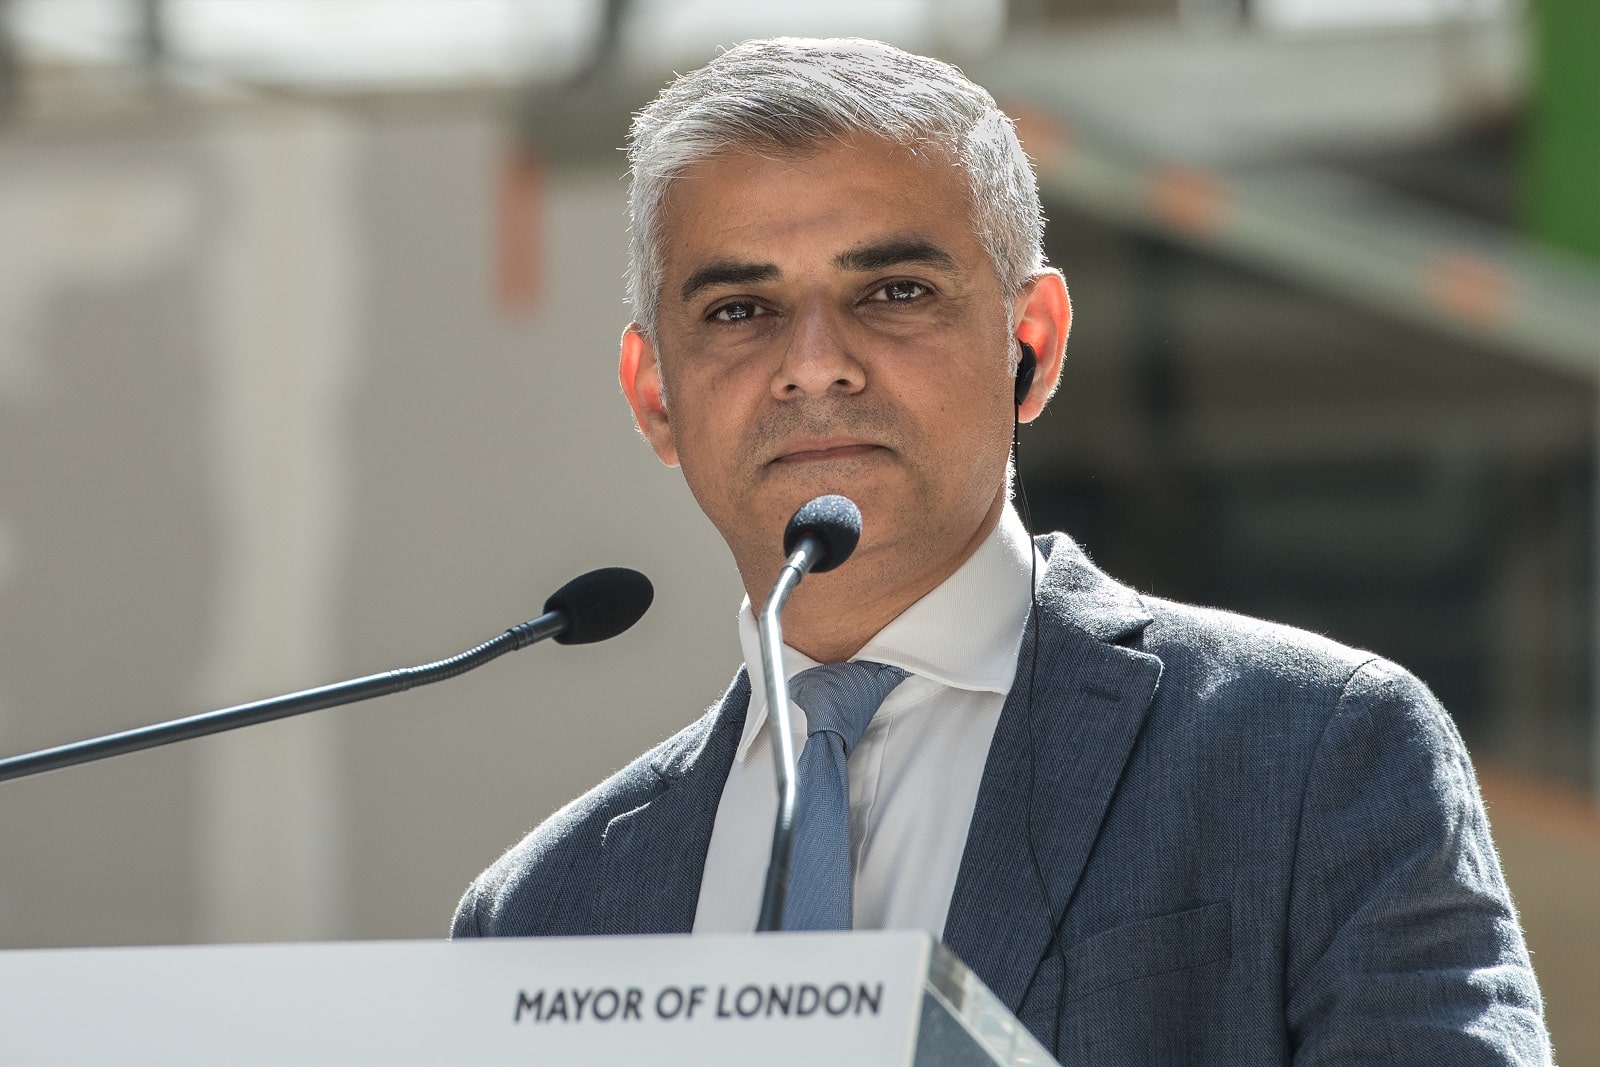 Image Credit: Shutterstock / Frederic Legrand – COMEO <p><span>Speaking about the Mayor of London, Sadiq Khan, Anderson argued that Khan is under the influence of “Islamists,” which has been slammed by critics as a racial slur.</span></p>